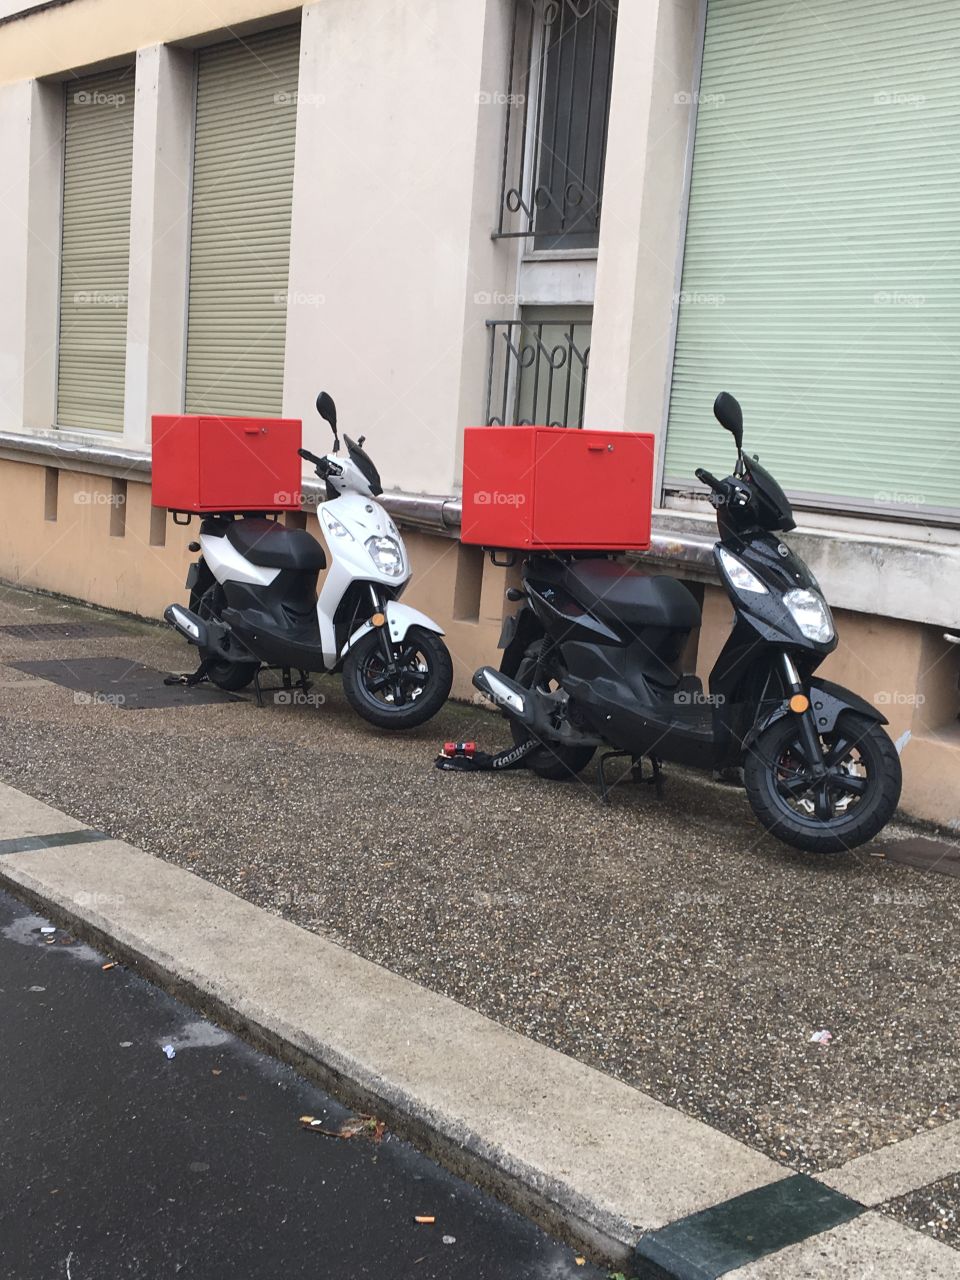 Motor scooter pizza deliveries